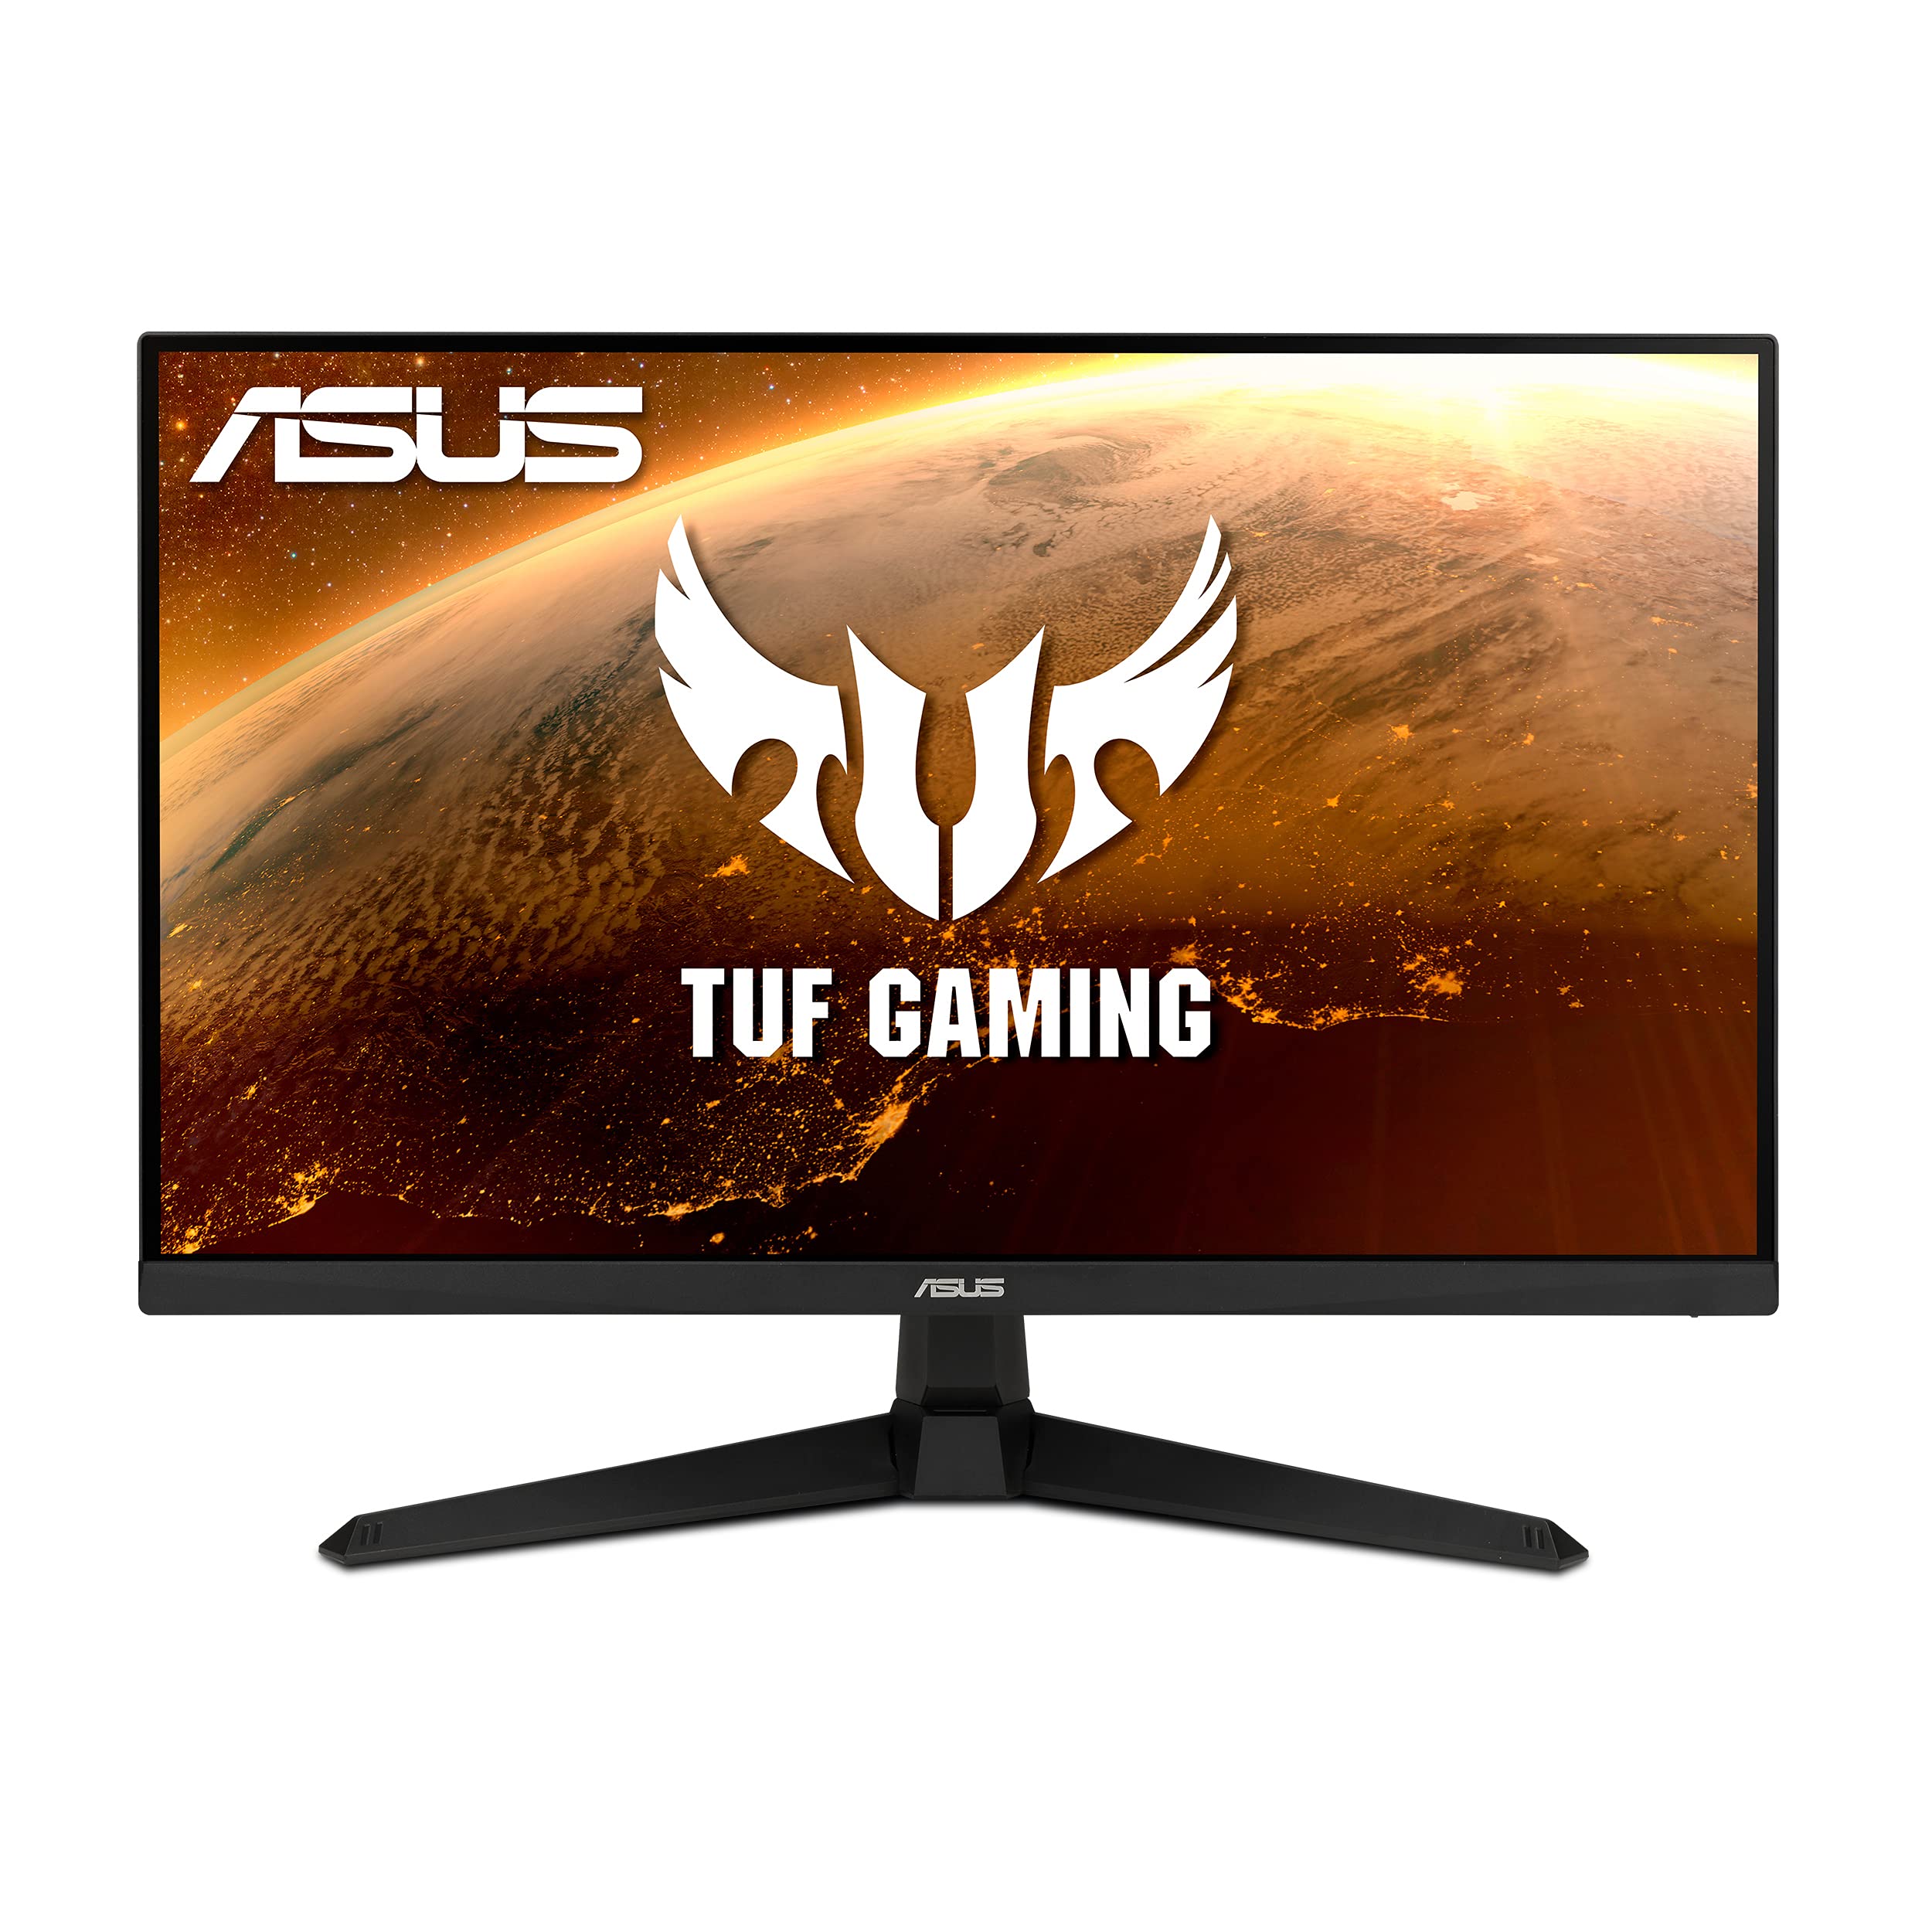 Asus TUF Gaming 27” 1080P Gaming Monitor (VG277Q1A) - Full HD, 165Hz (Supports 144Hz), 1ms, Extreme Low Motion Blur, FreeSync Premium, Shadow Boost, Eye Care, HDMI, DisplayPort, Tilt Adjustable